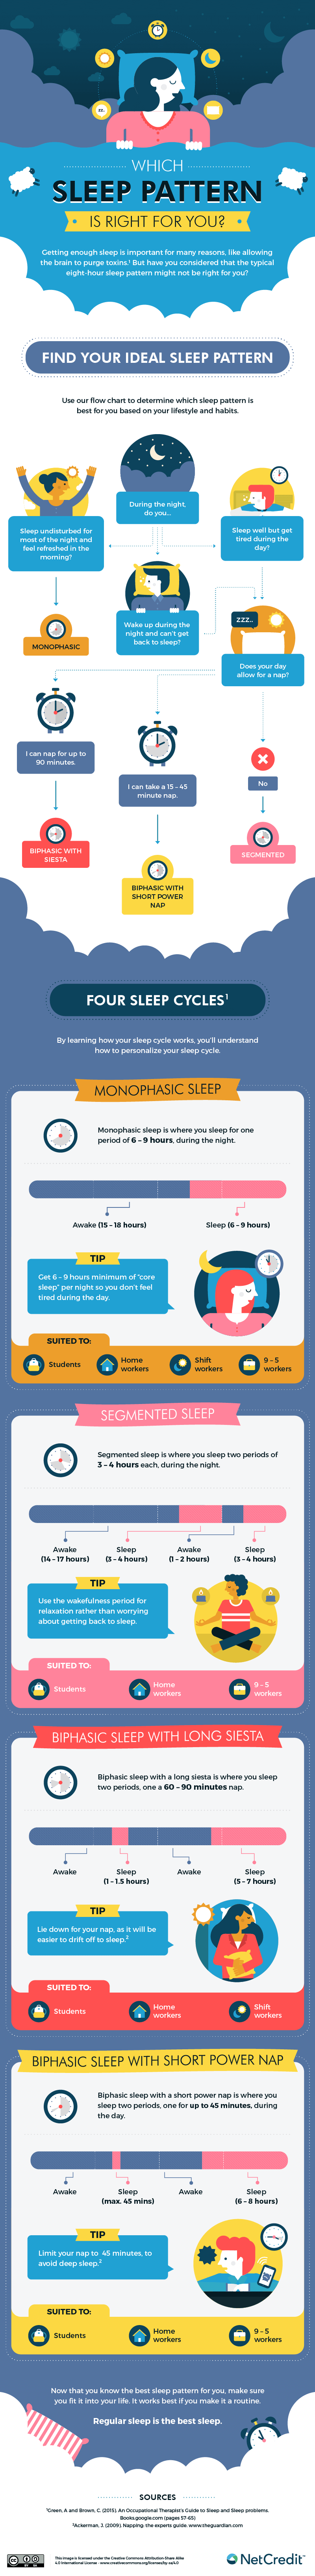 Which Sleep Pattern is Right for You? - #infographic